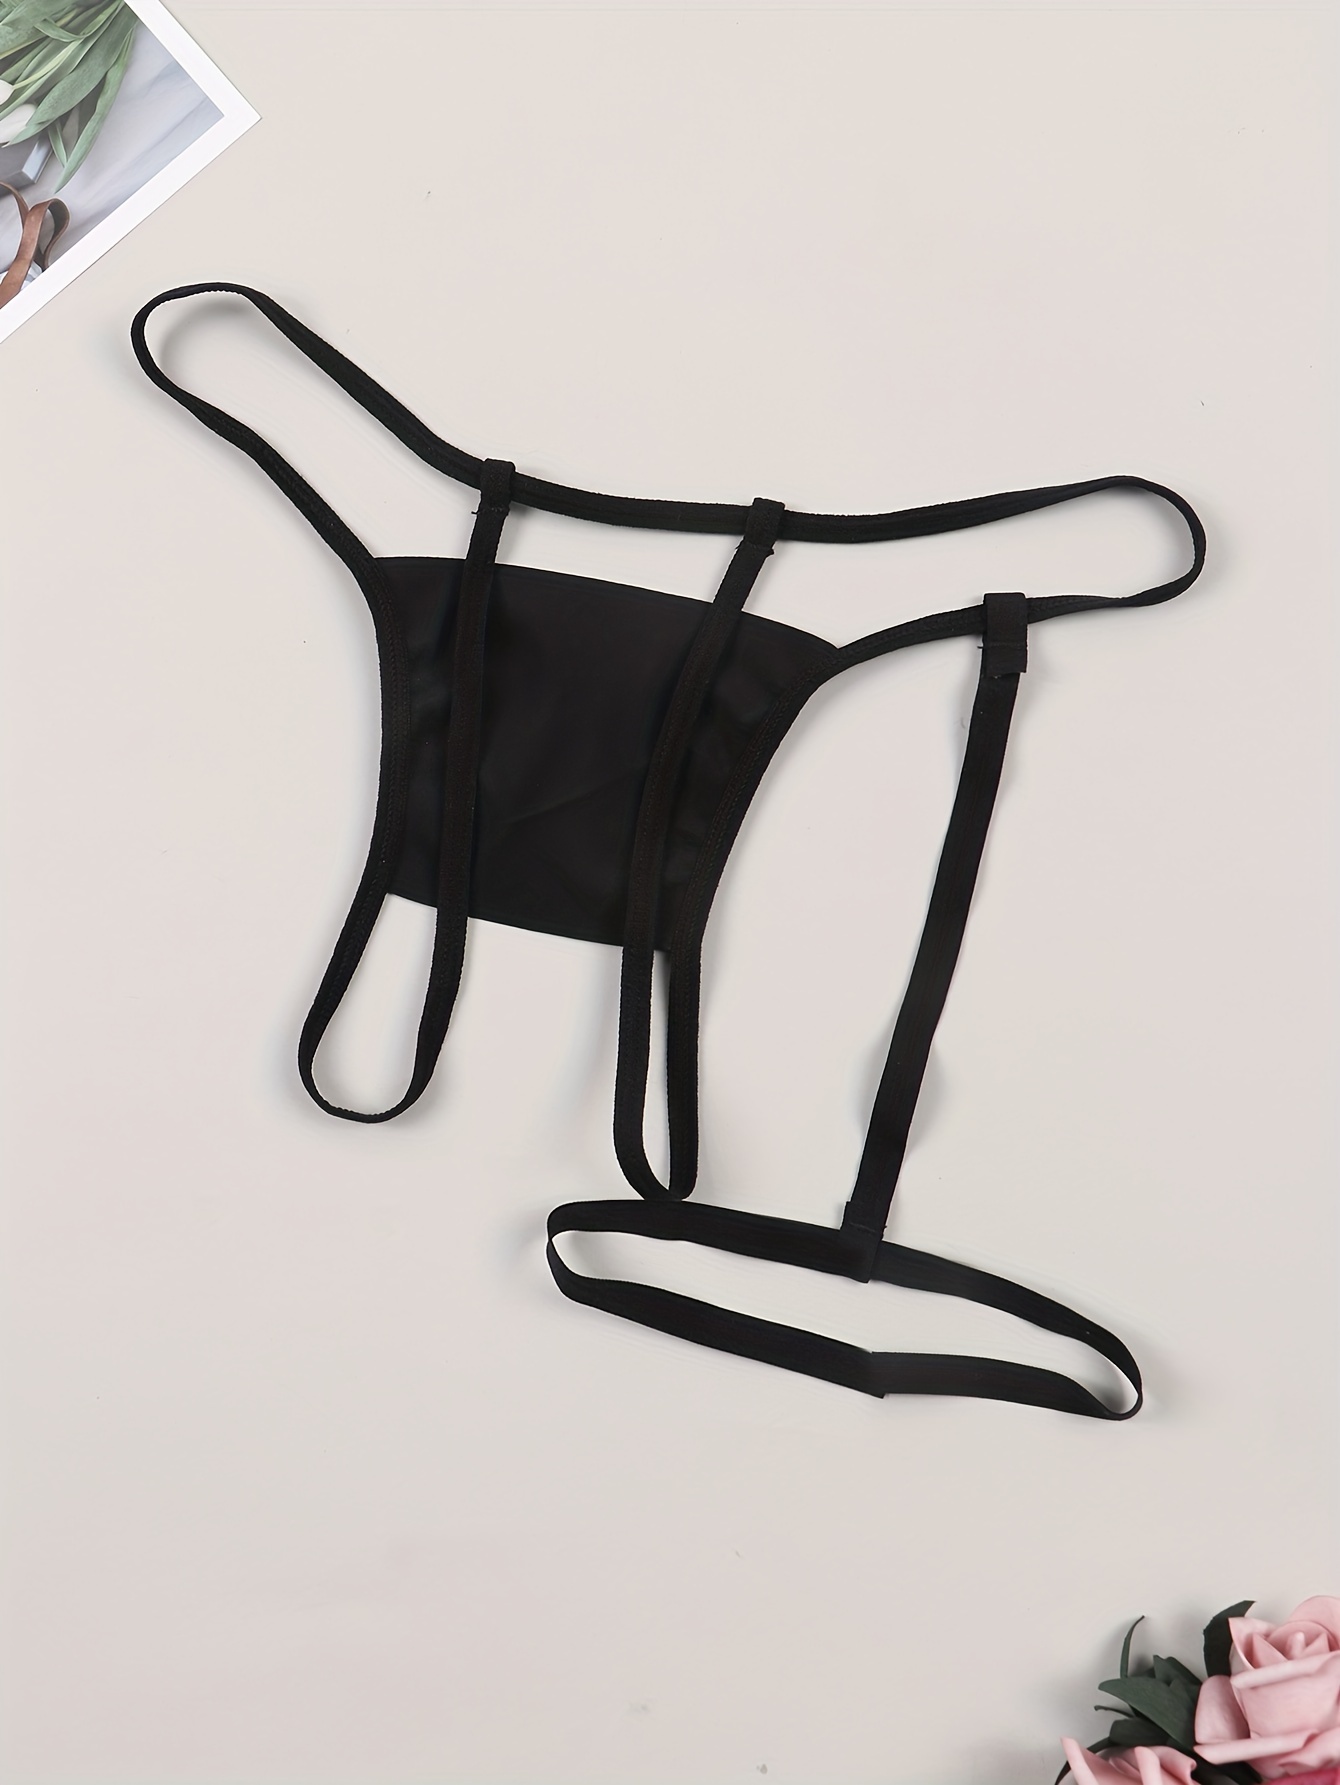 Women's Sexy Lingerie, Crotchless Thong Panties